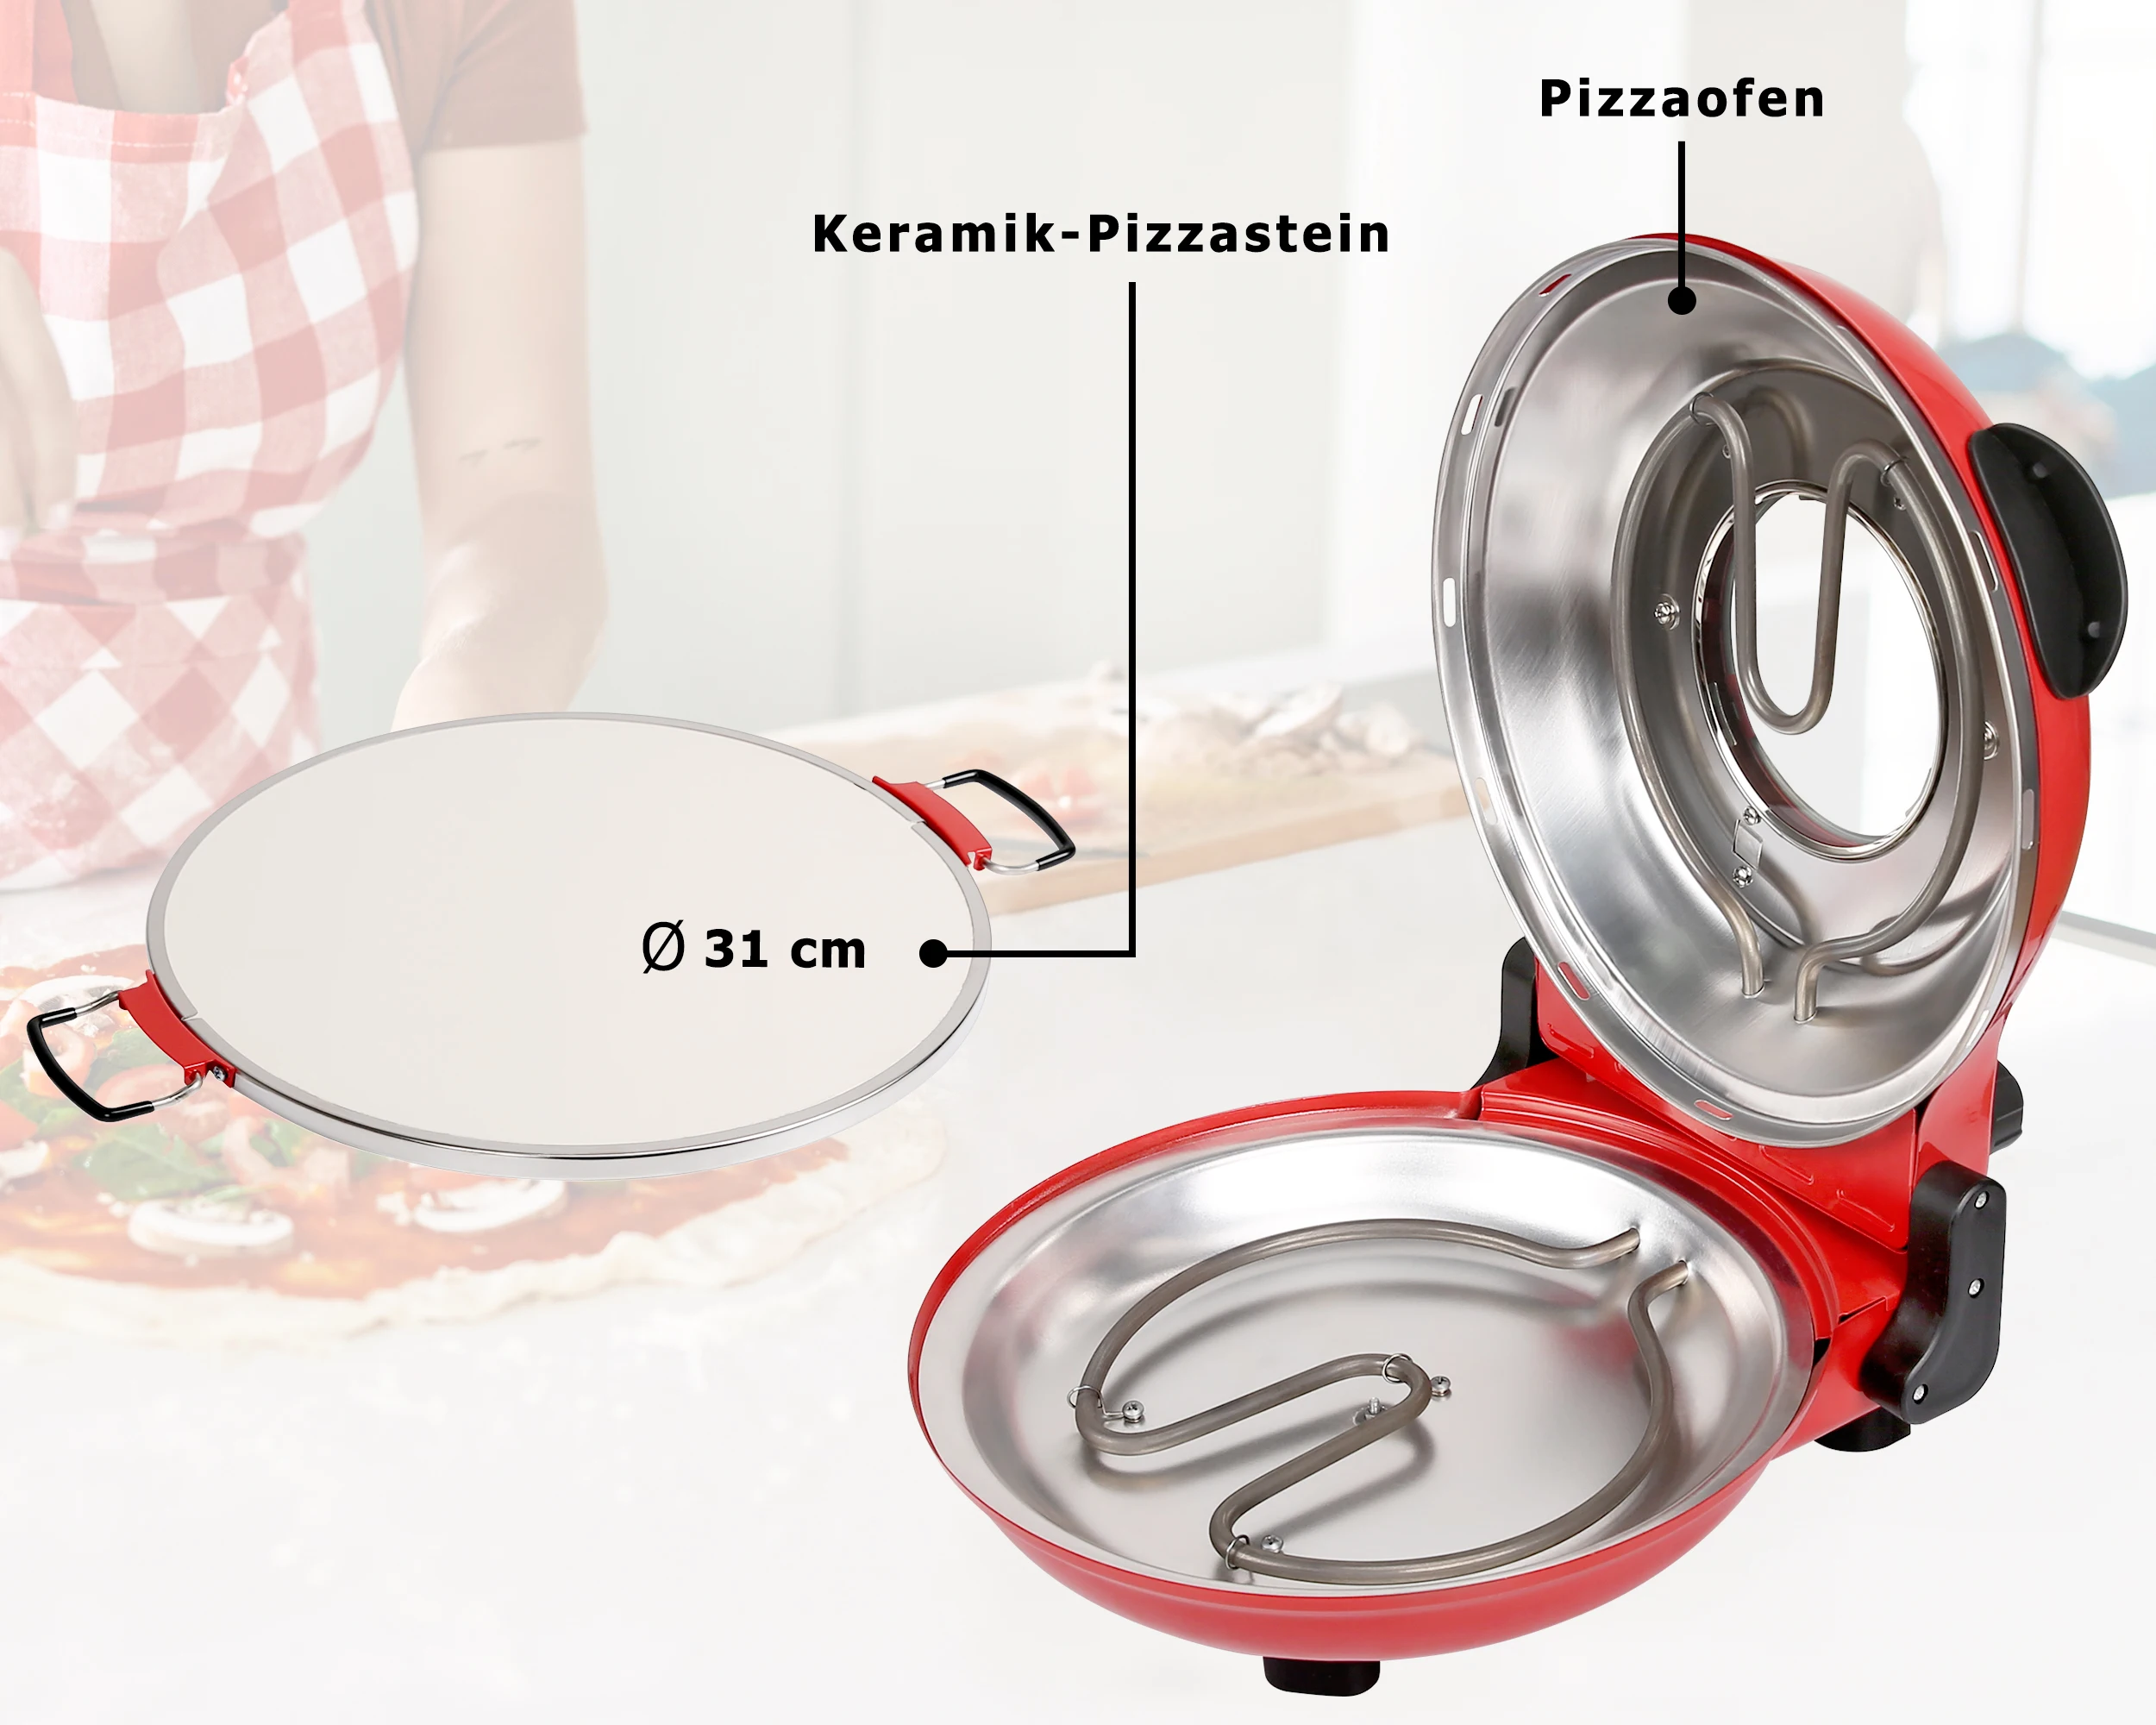 https://ae01.alicdn.com/kf/S581ade879a5644e59776b7a500814f8a8/Professional-Countertop-Electric-Pizza-Maker-1200W-Pizza-Maker-Machine-stone-outdoor-wood-fired-pizza-oven-for.jpg